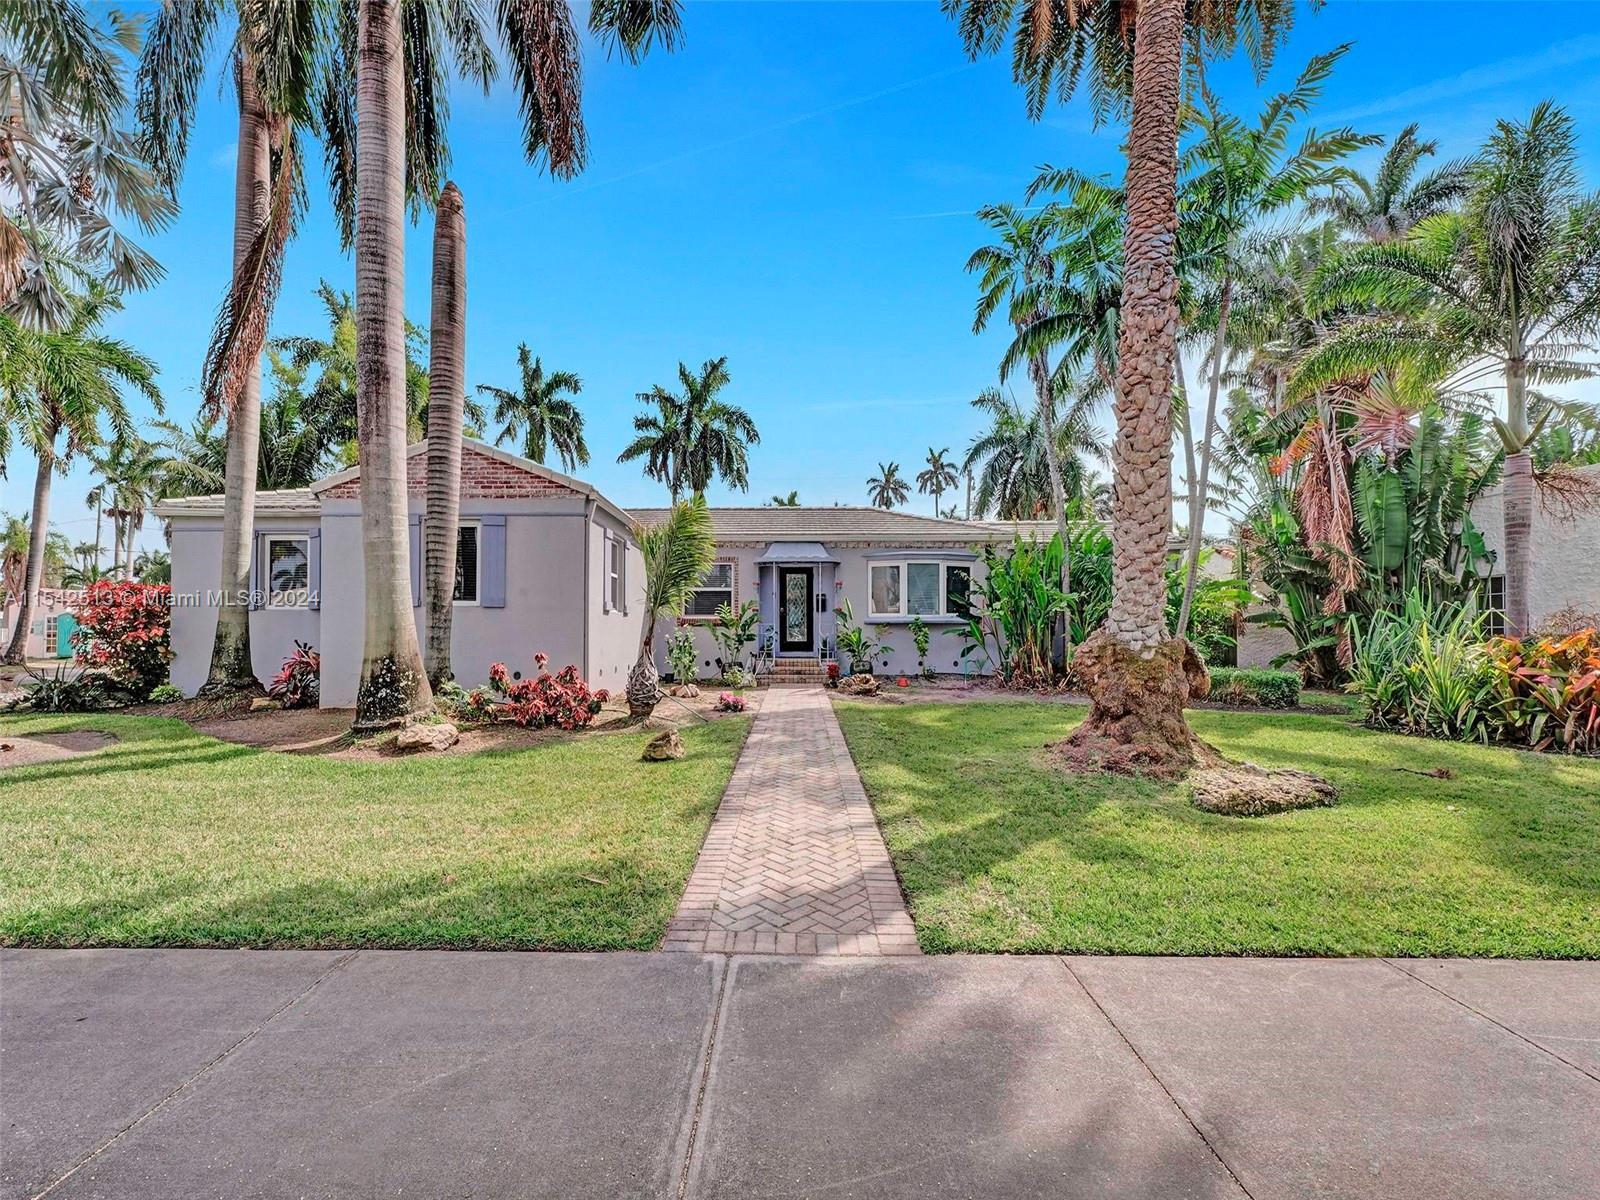 Photo of 900 Tyler St in Hollywood, FL